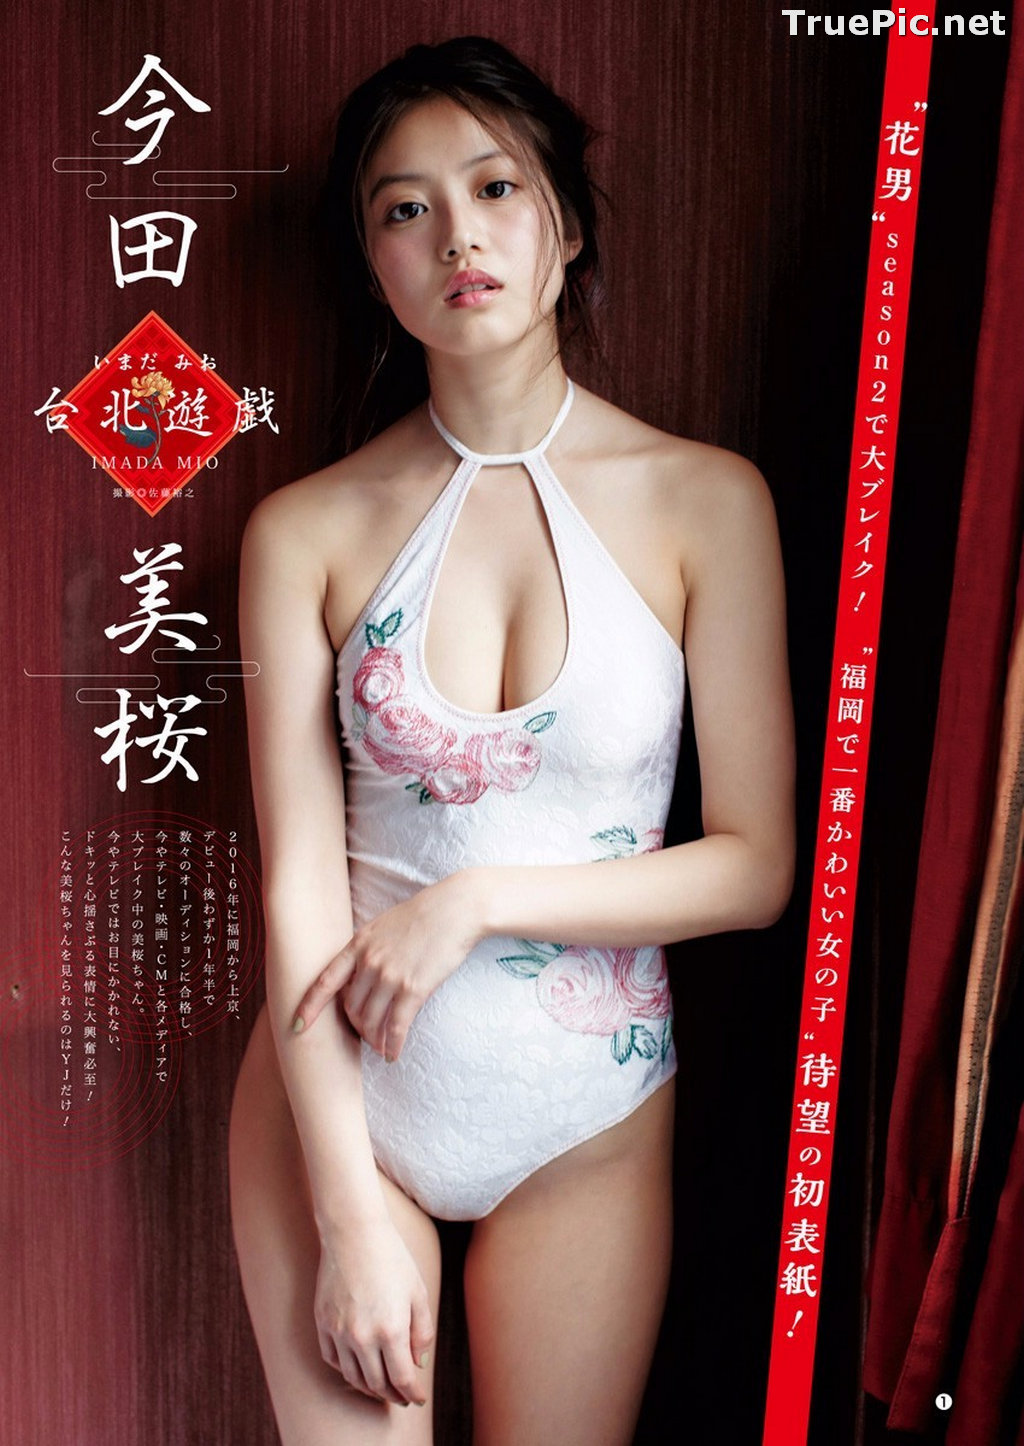 Image Japanese Actress and Model - Mio Imada (今田美櫻) - Sexy Picture Collection 2020 - TruePic.net - Picture-193